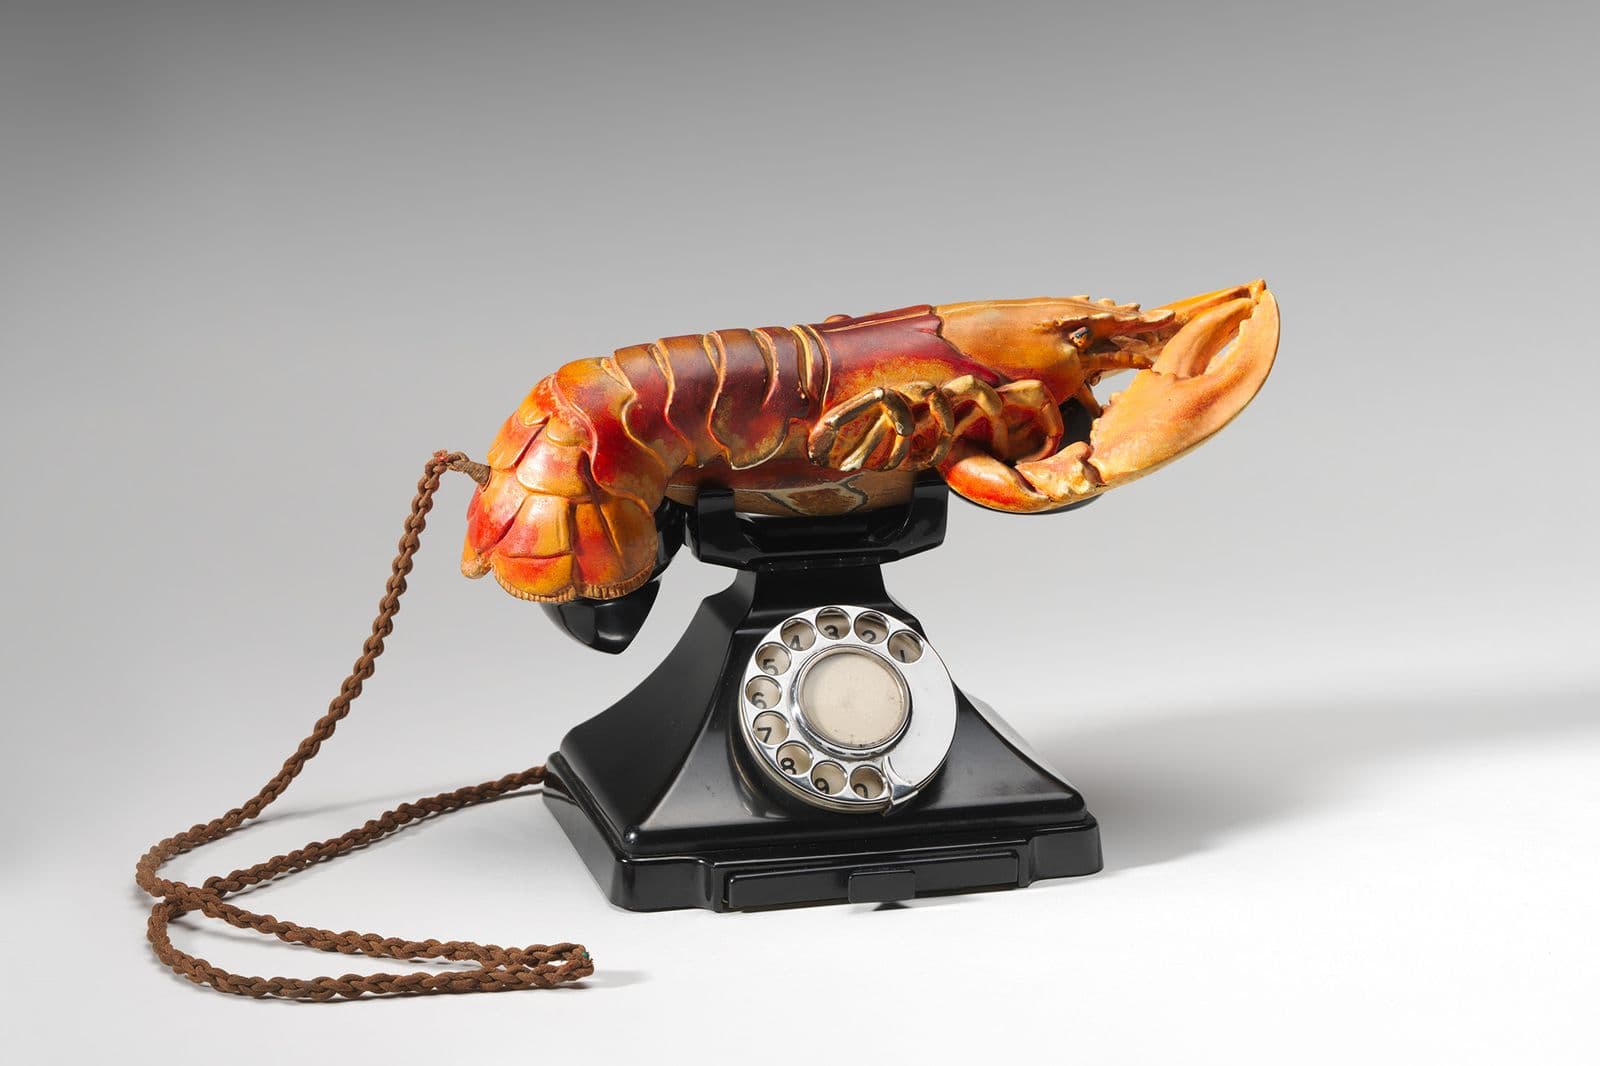 Black rotary telephone with circular wheel finger dial with lobster claw as a the handset